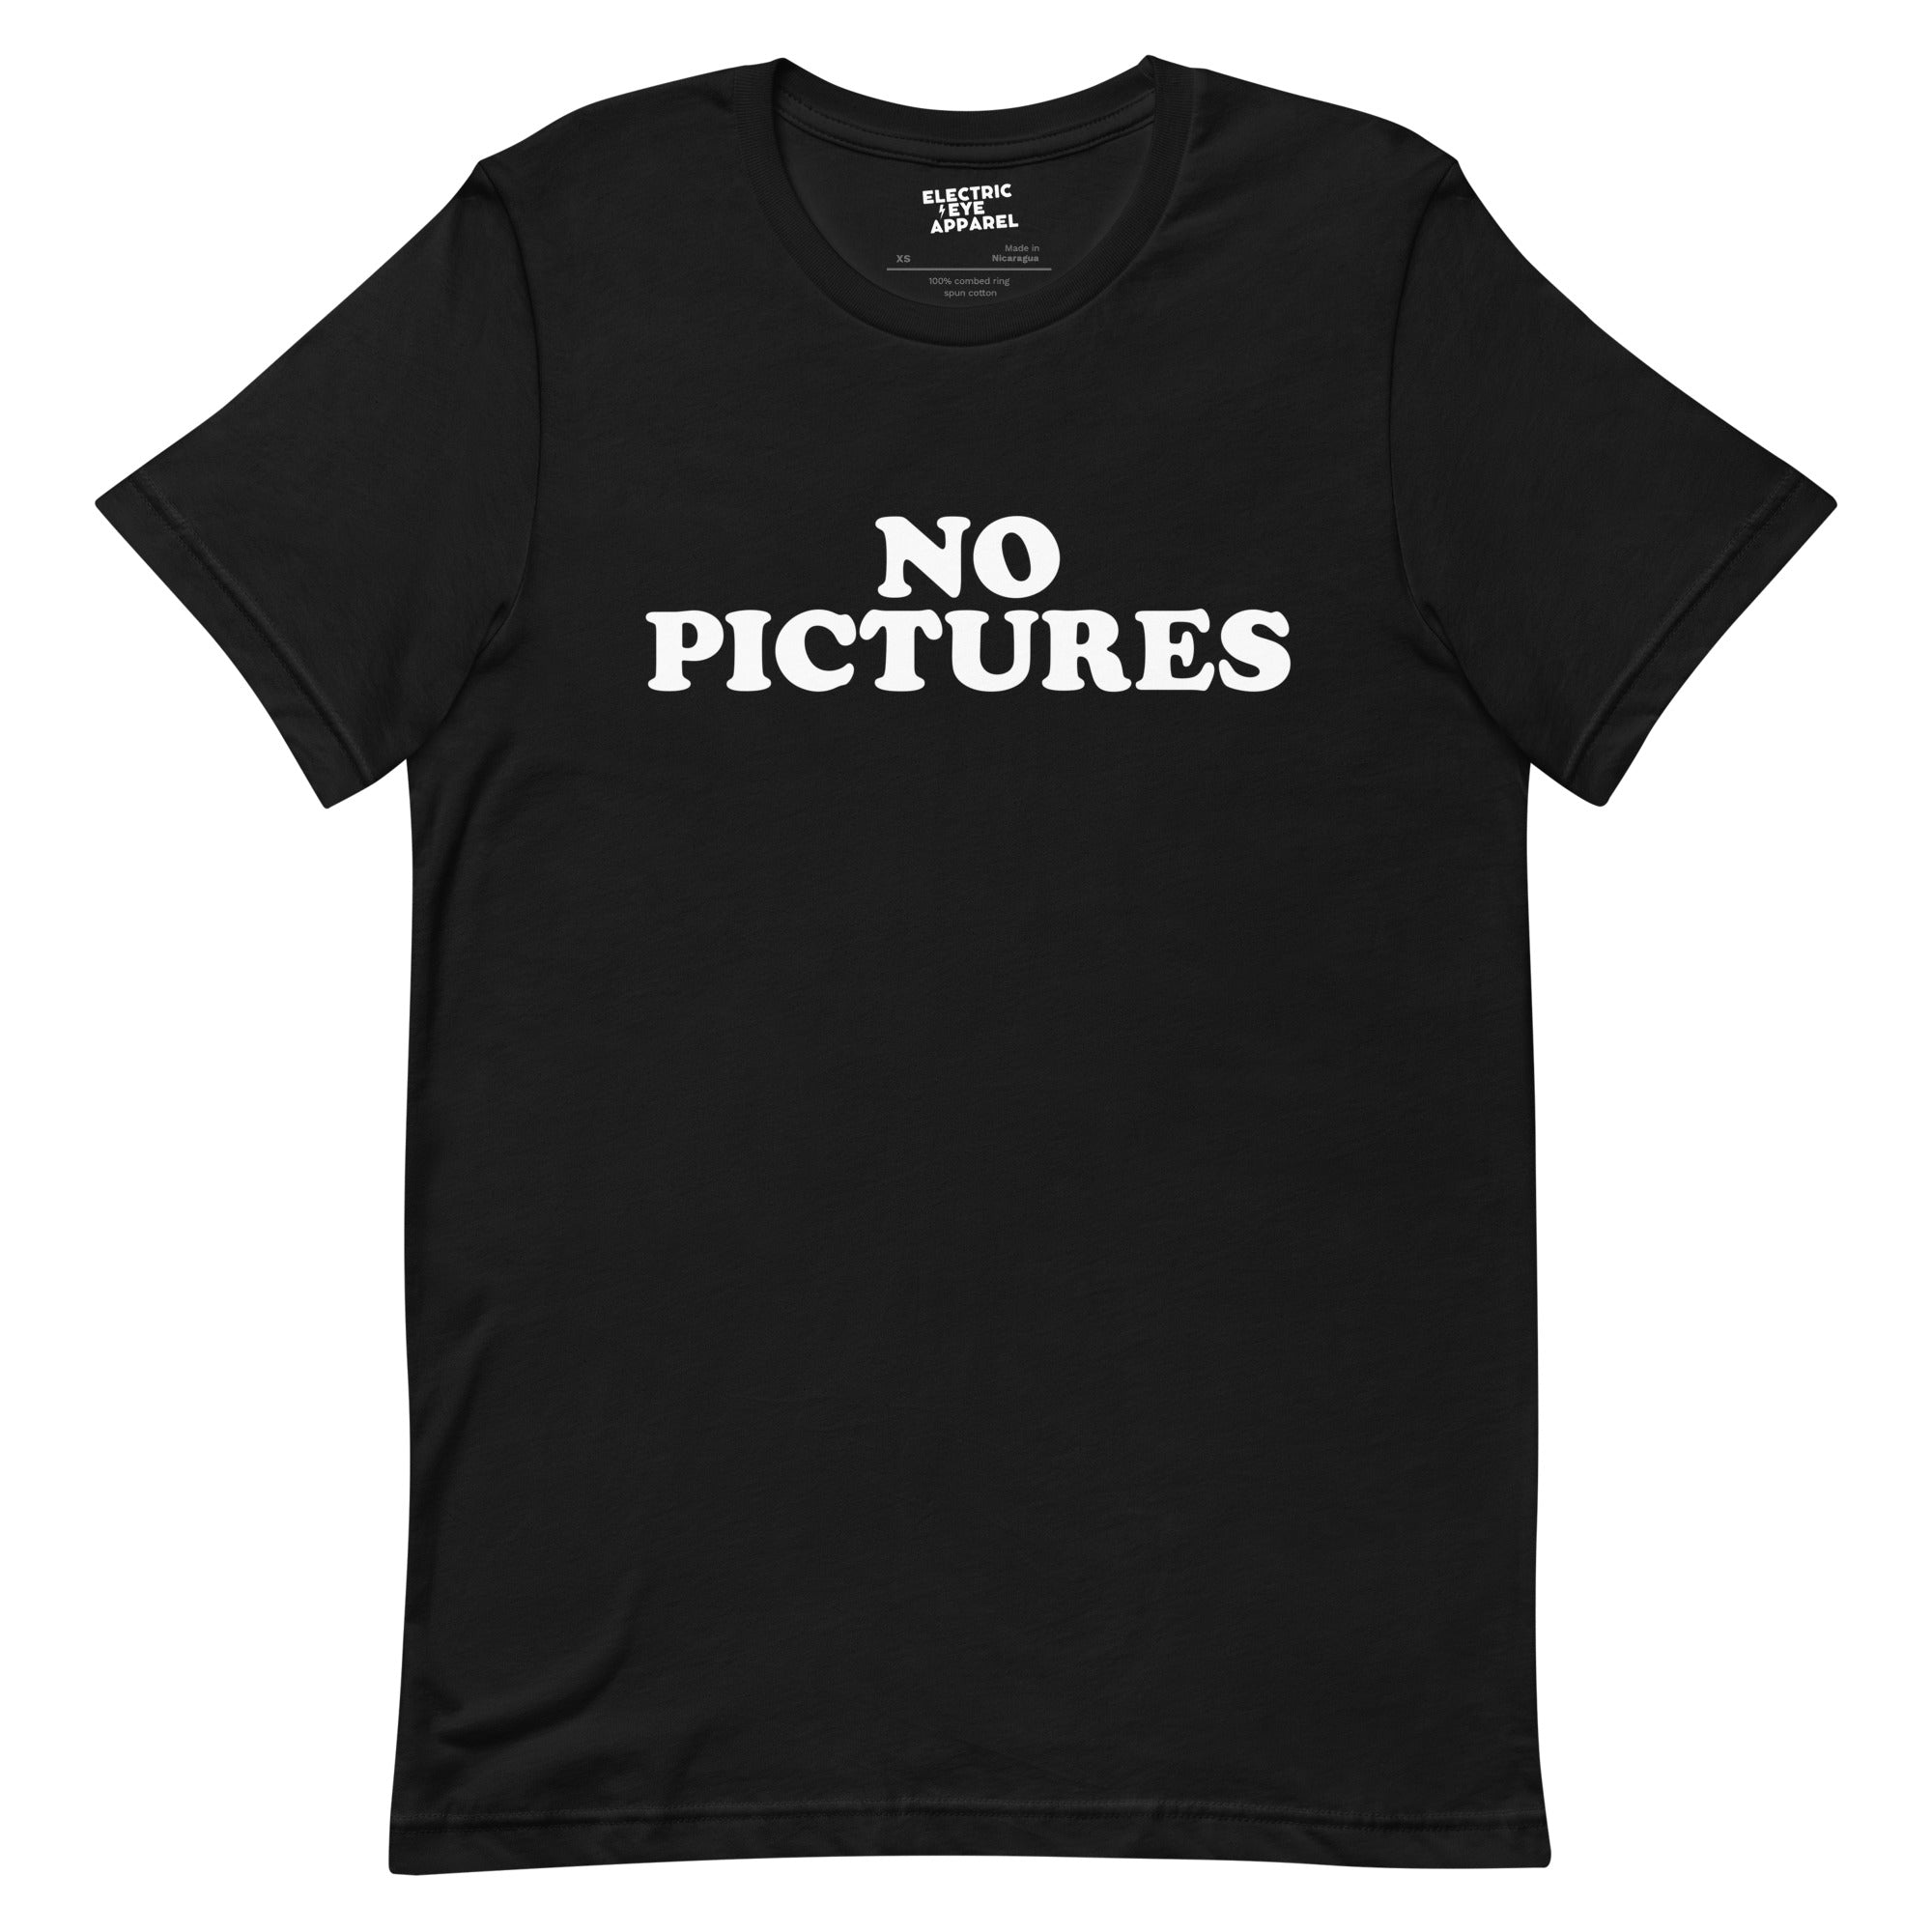 Debbie Harry Blondie Inspired 'No Pictures' Vintage Style Premium Quality Printed 100% Cotton Unisex t-shirt